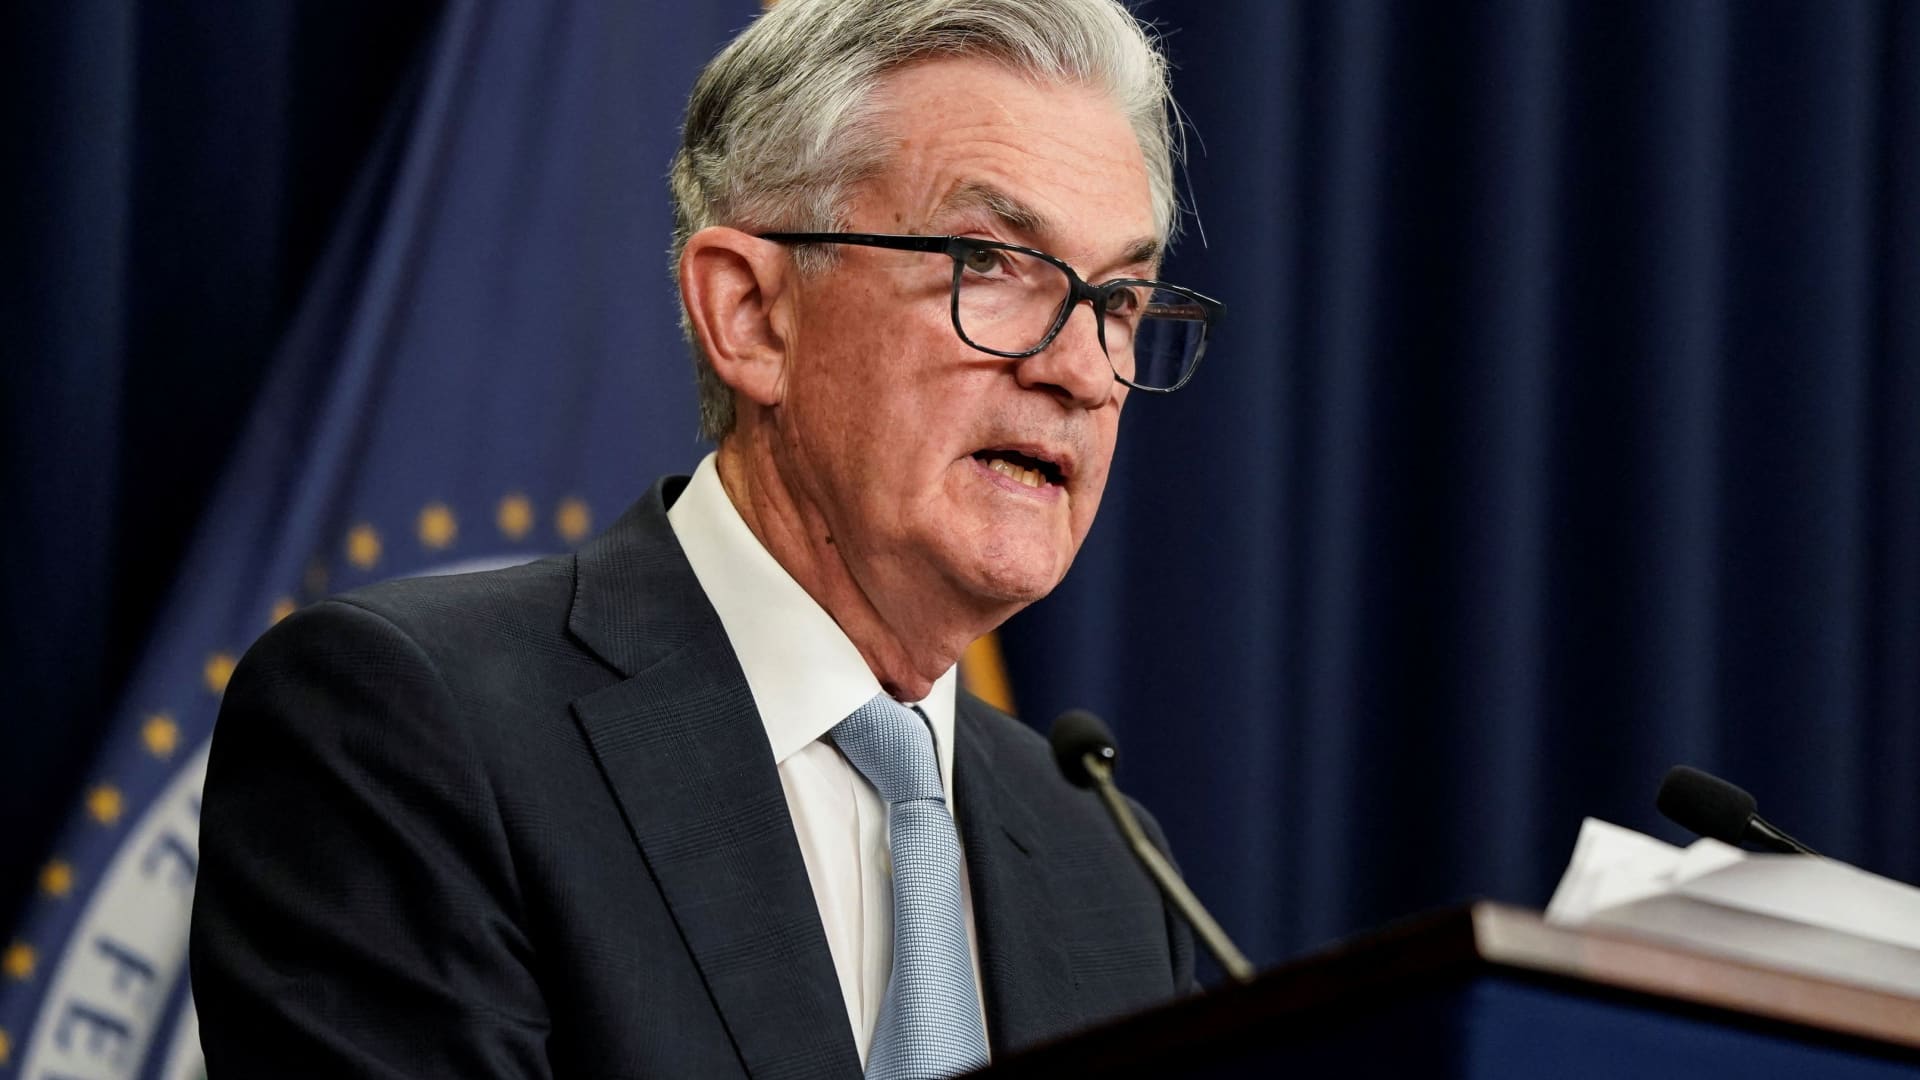 Powell vows that the Fed is 'acutely focused' on bringing down inflation - CNBC Finance (Picture 1)